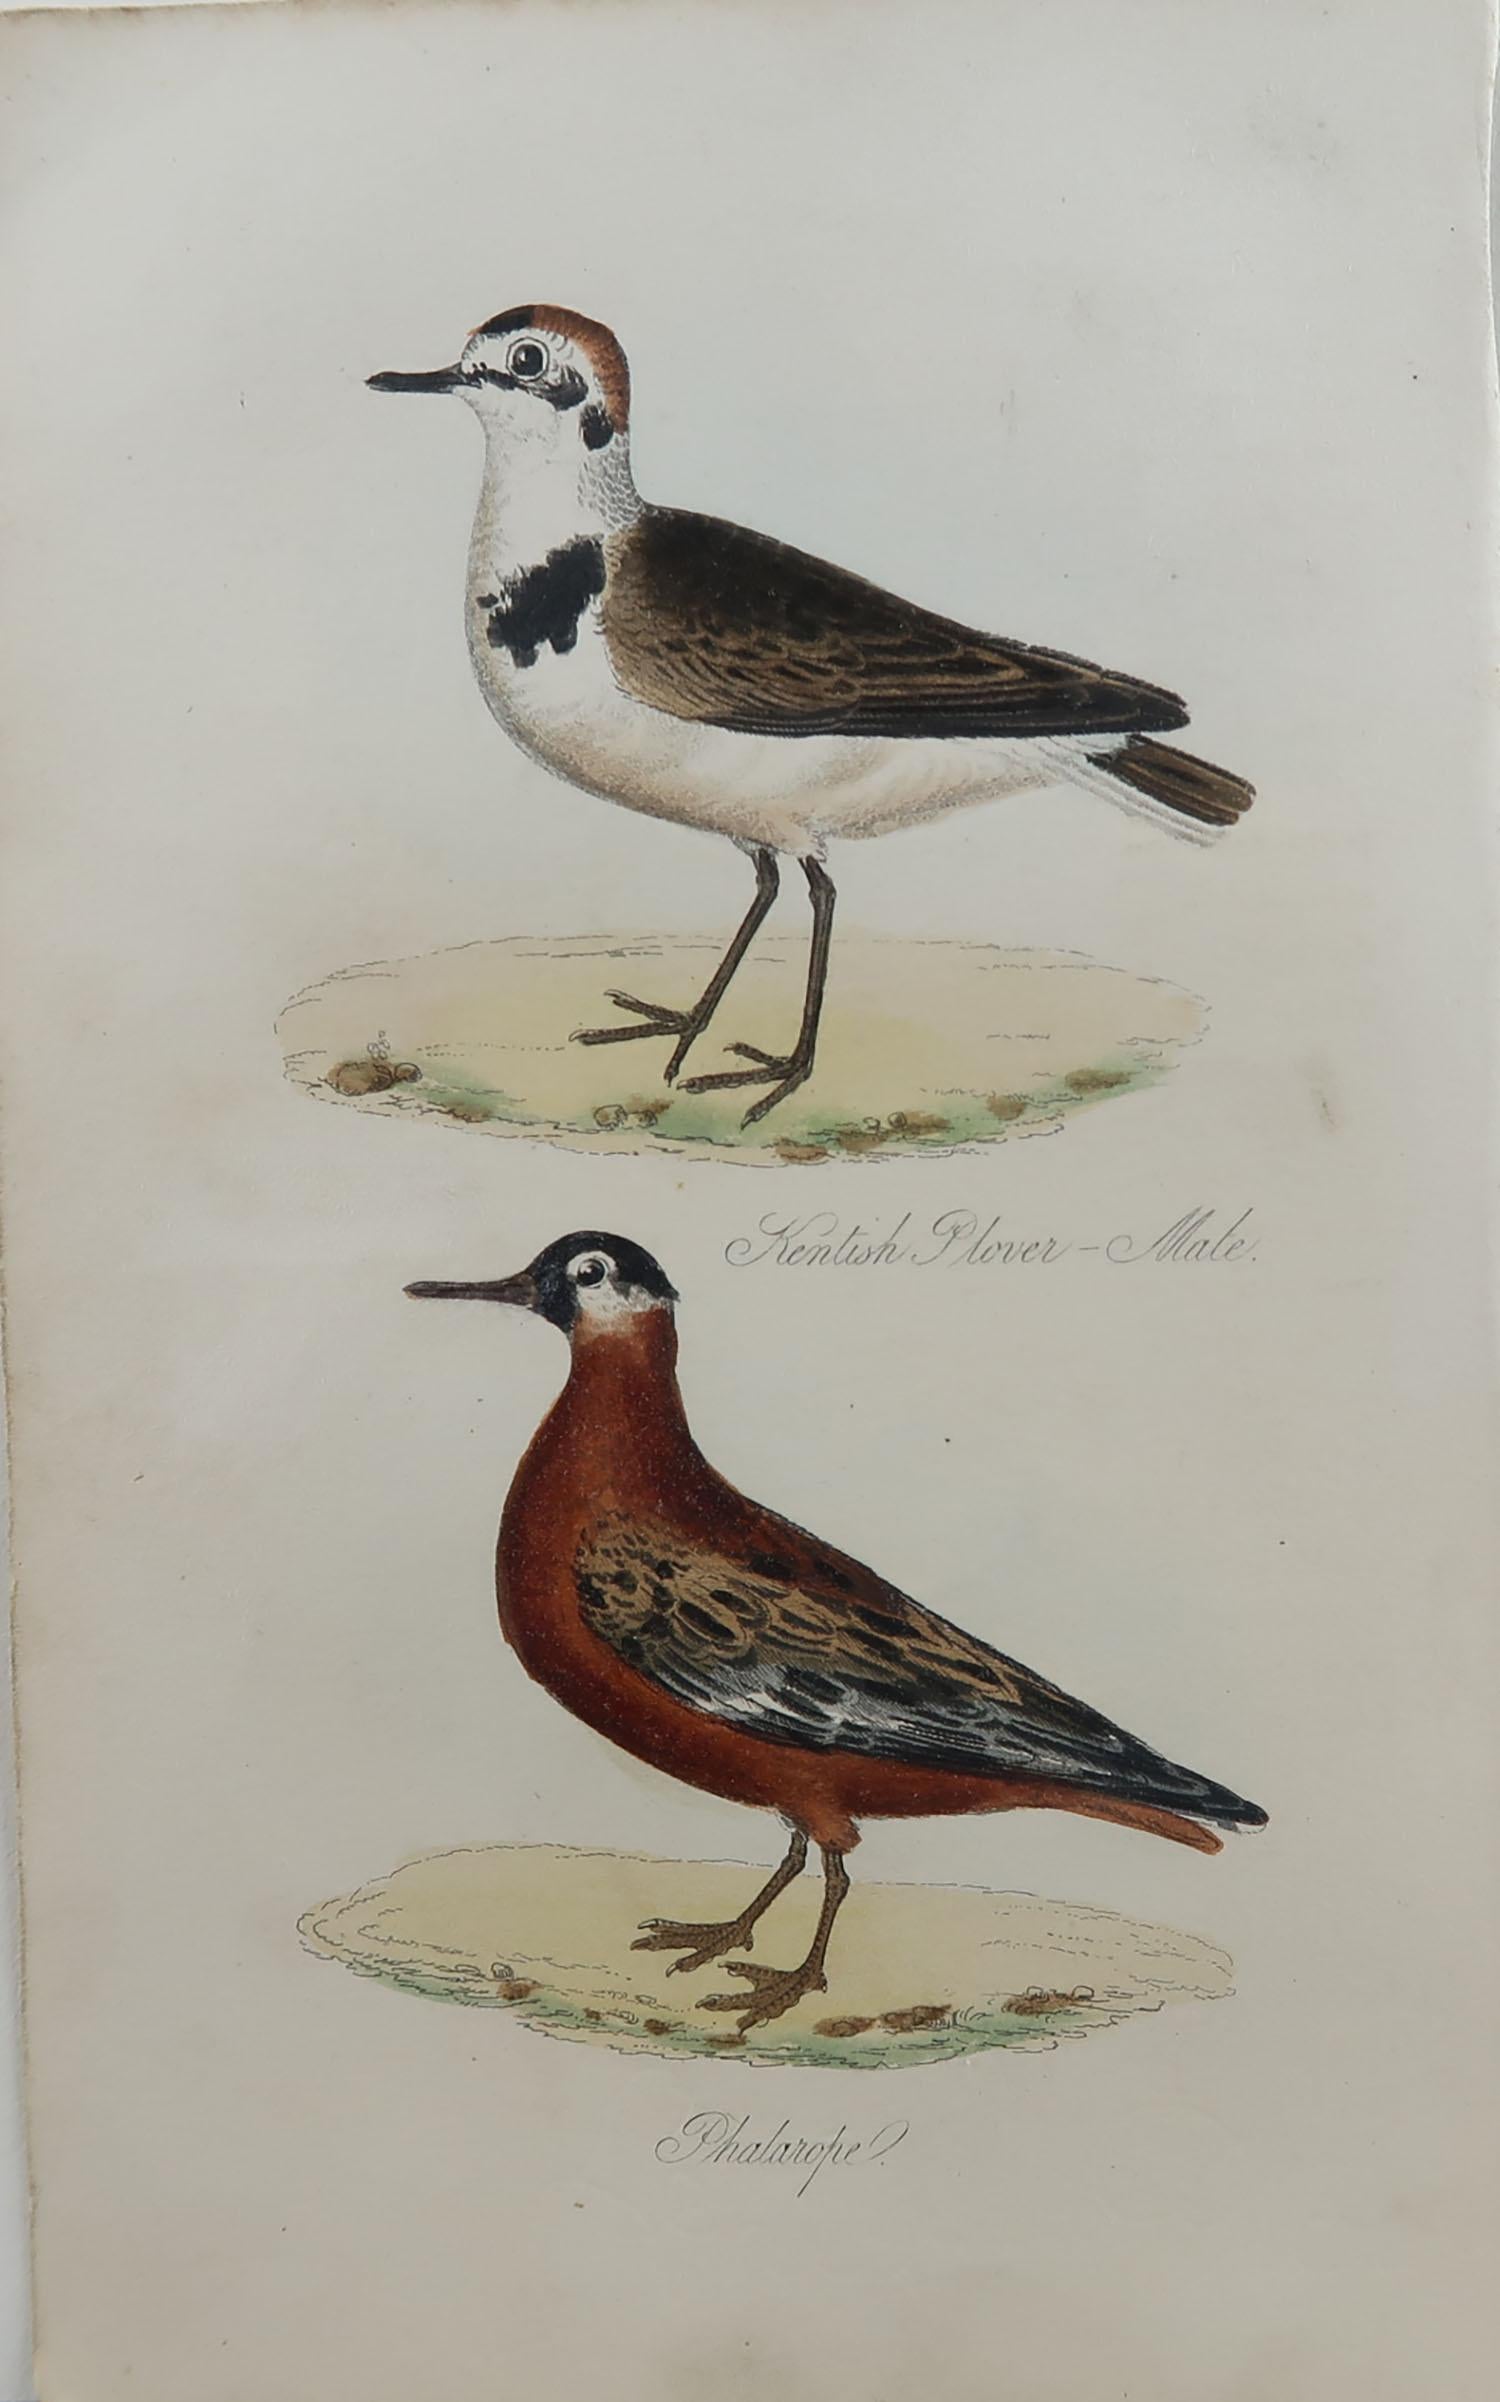 Great image of a Kentish Plover and a phalarope

Unframed. It gives you the option of perhaps making a set up using your own choice of frames.

Lithograph heightened with gum Arabic.

Original color

Published, circa 1850

Free